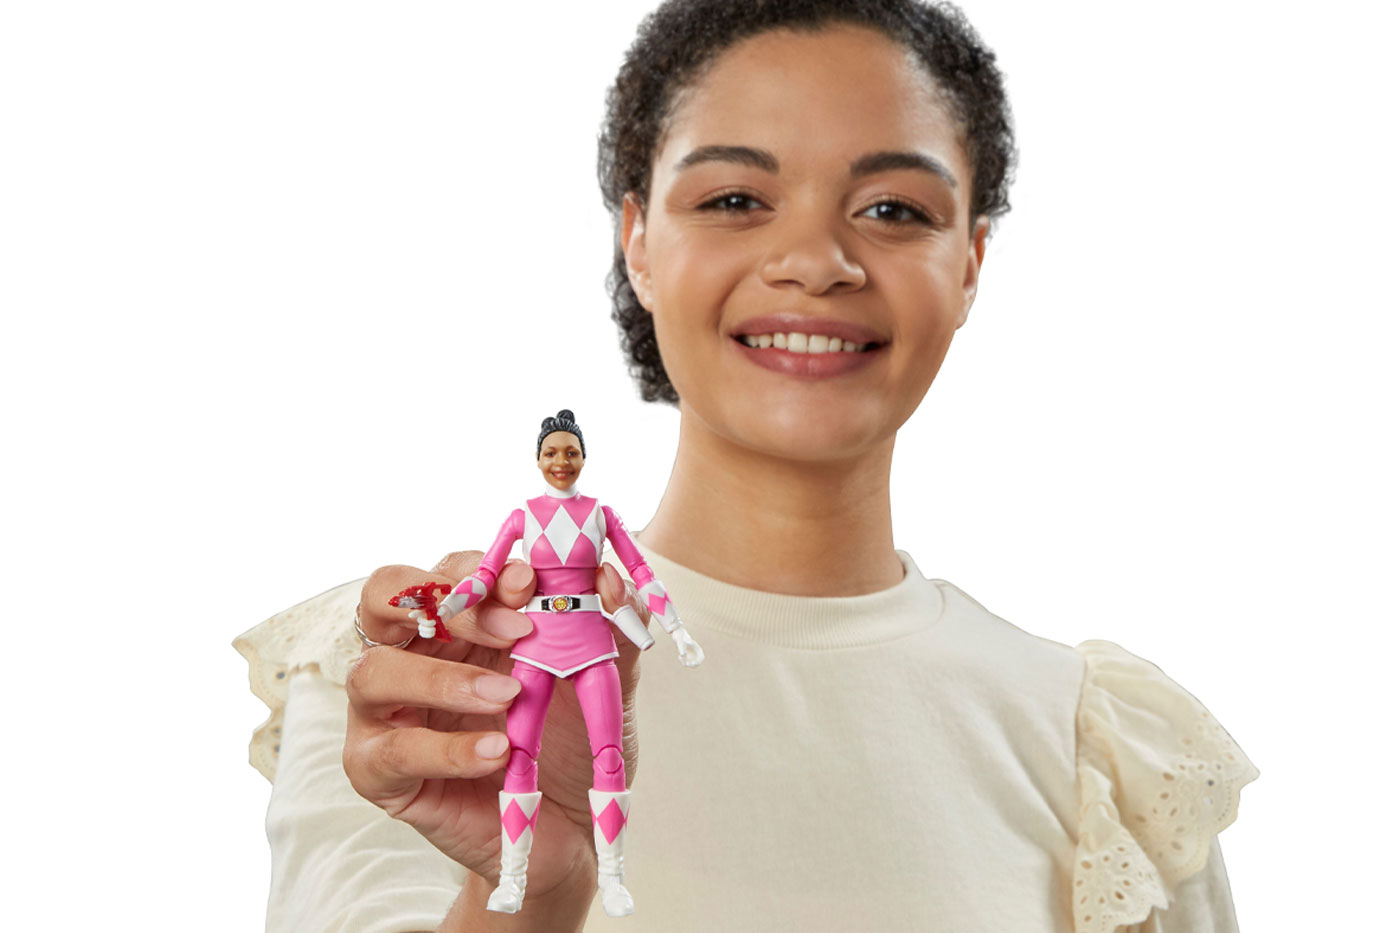 You can now turn yourself into an action figure!